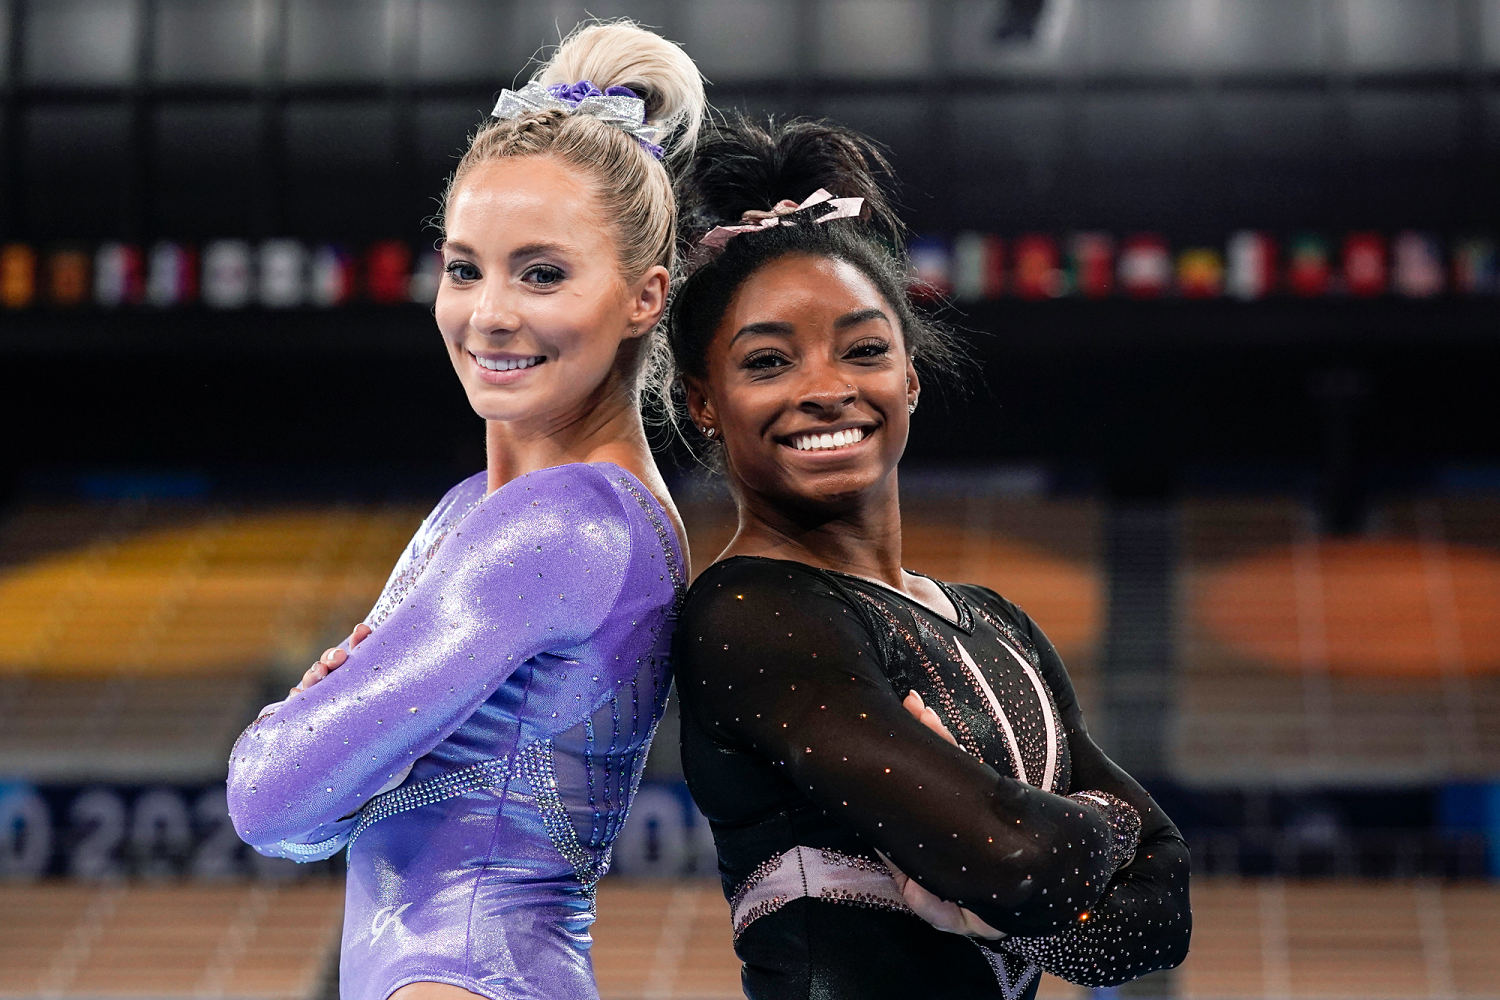 Simone Biles allegedly blocked by former Olympic teammate who criticized Paris team's work ethic